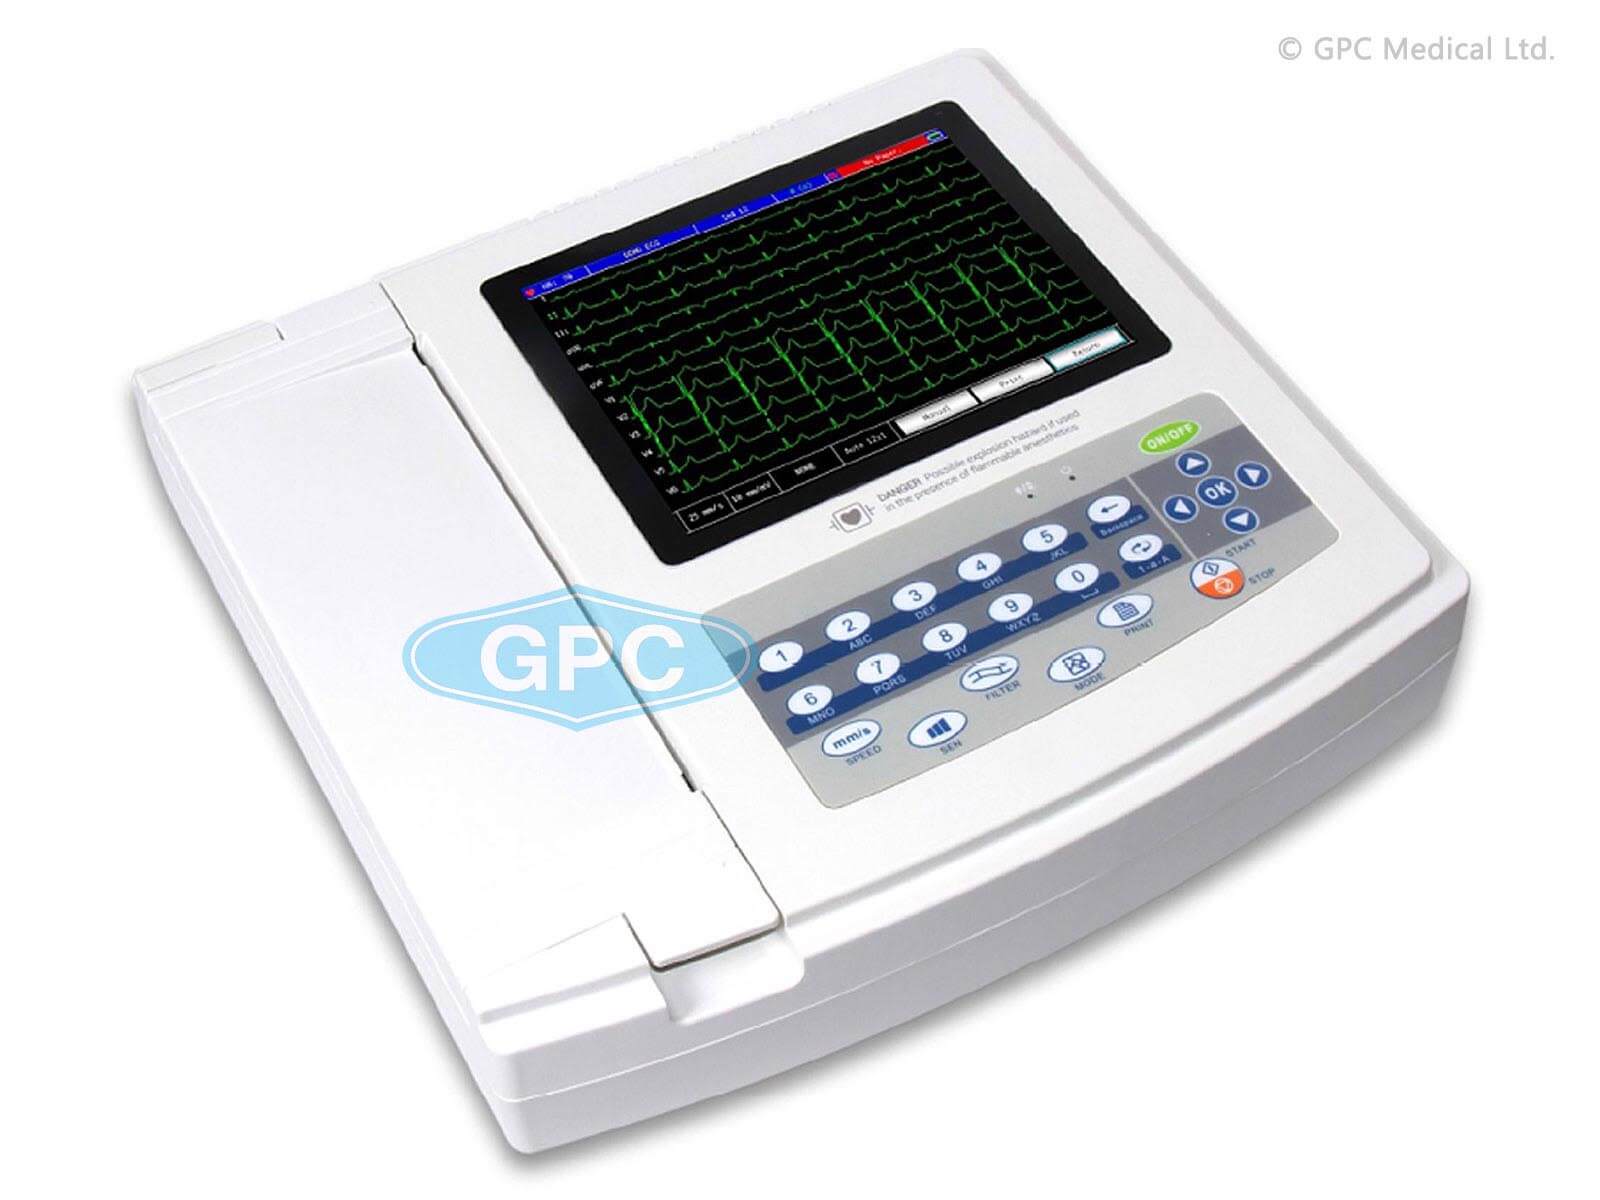 Electrocardiograph-12 Channel